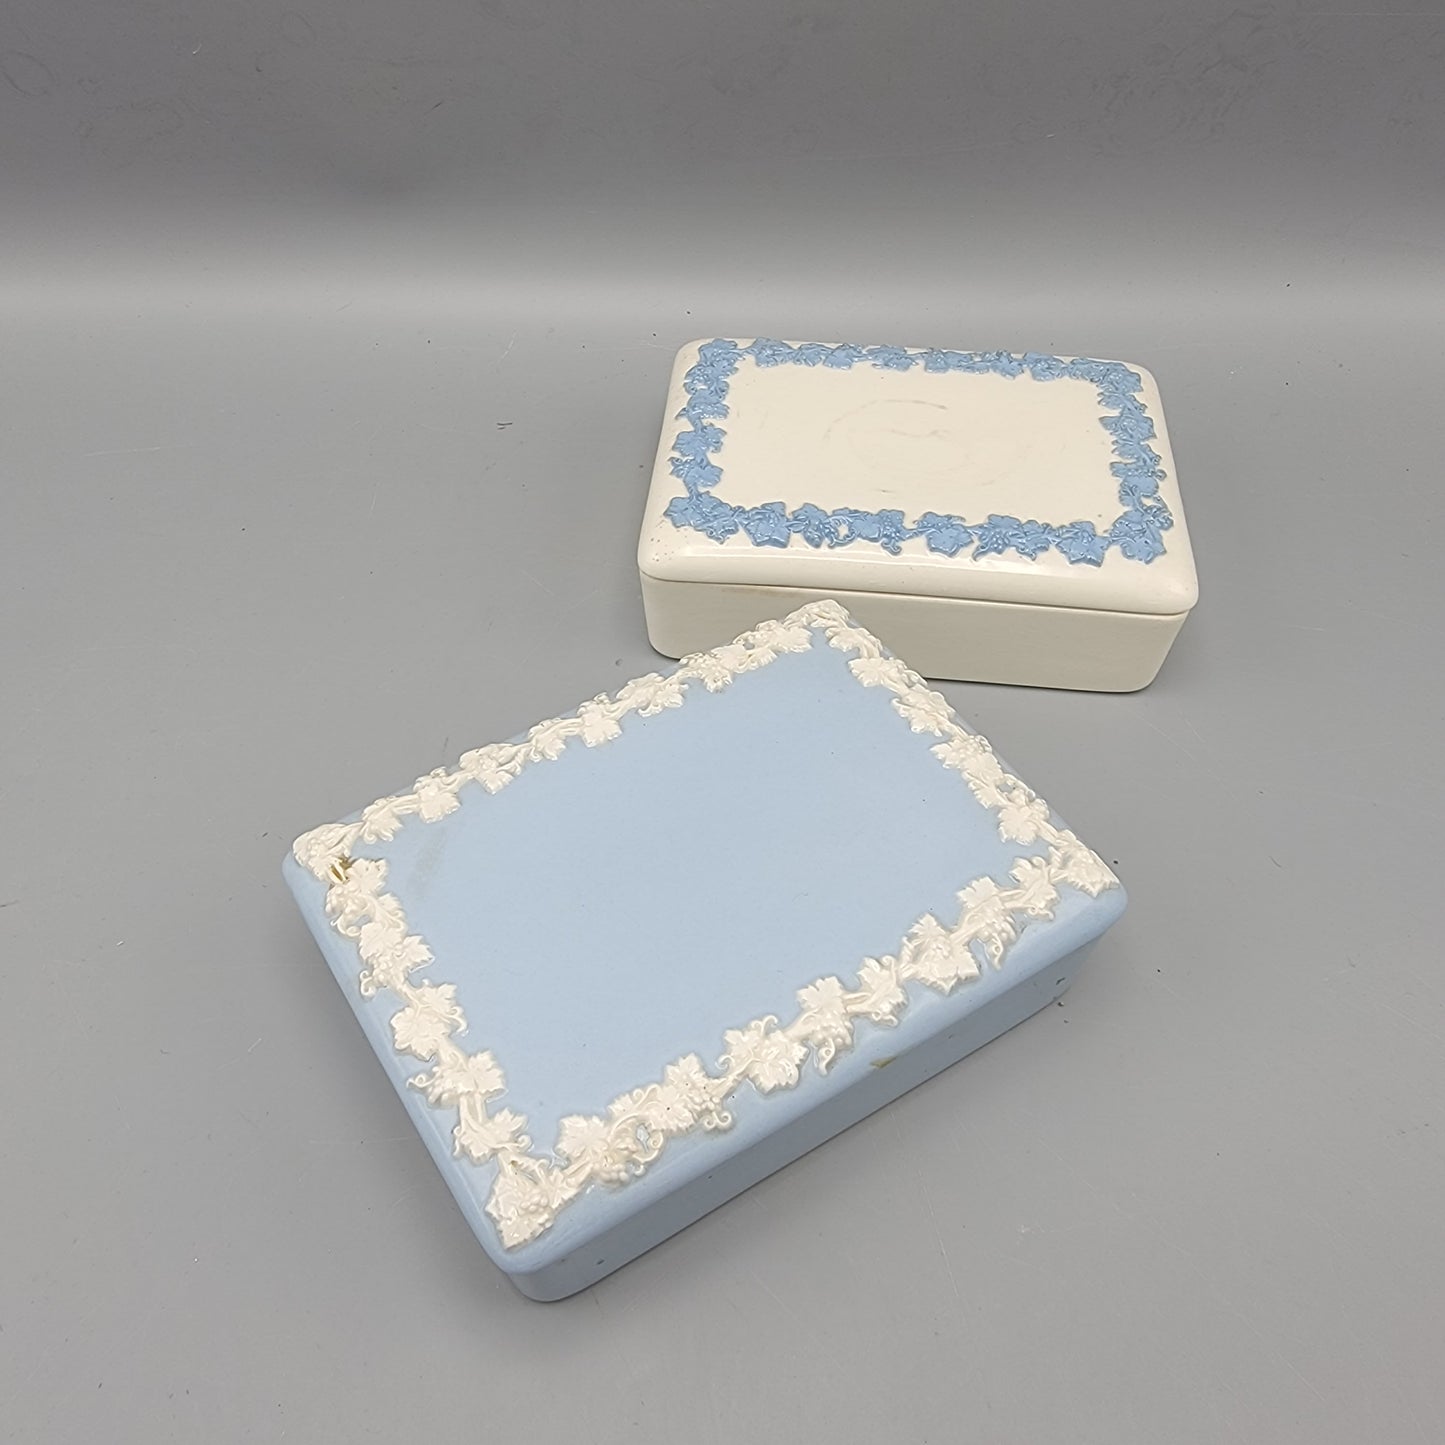 Two Wedgwood Queensware Rectangular Boxes with Grapevine Decoration